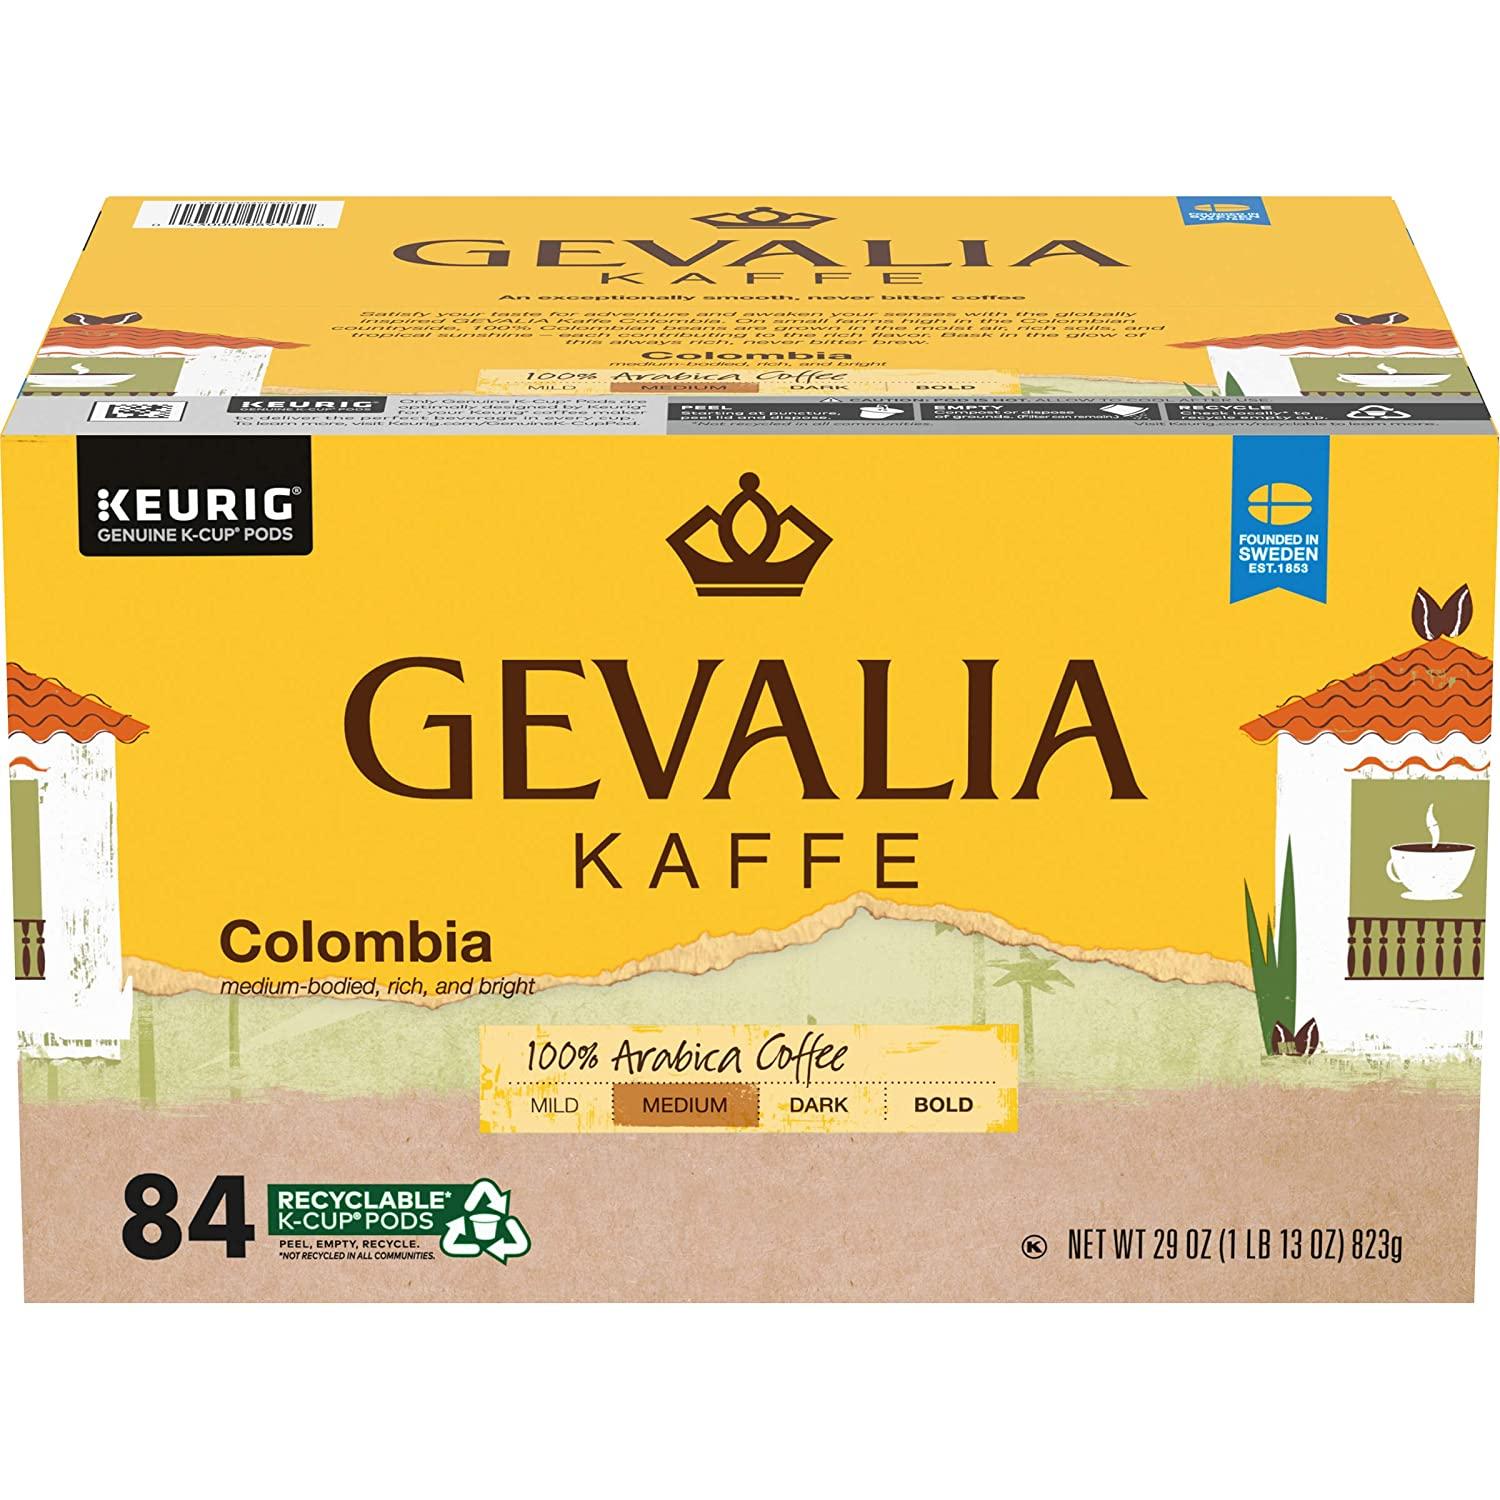 84 Gevalia Colombia Blend Medium Roast K-Cup Coffee Pods for $20.56 Shipped